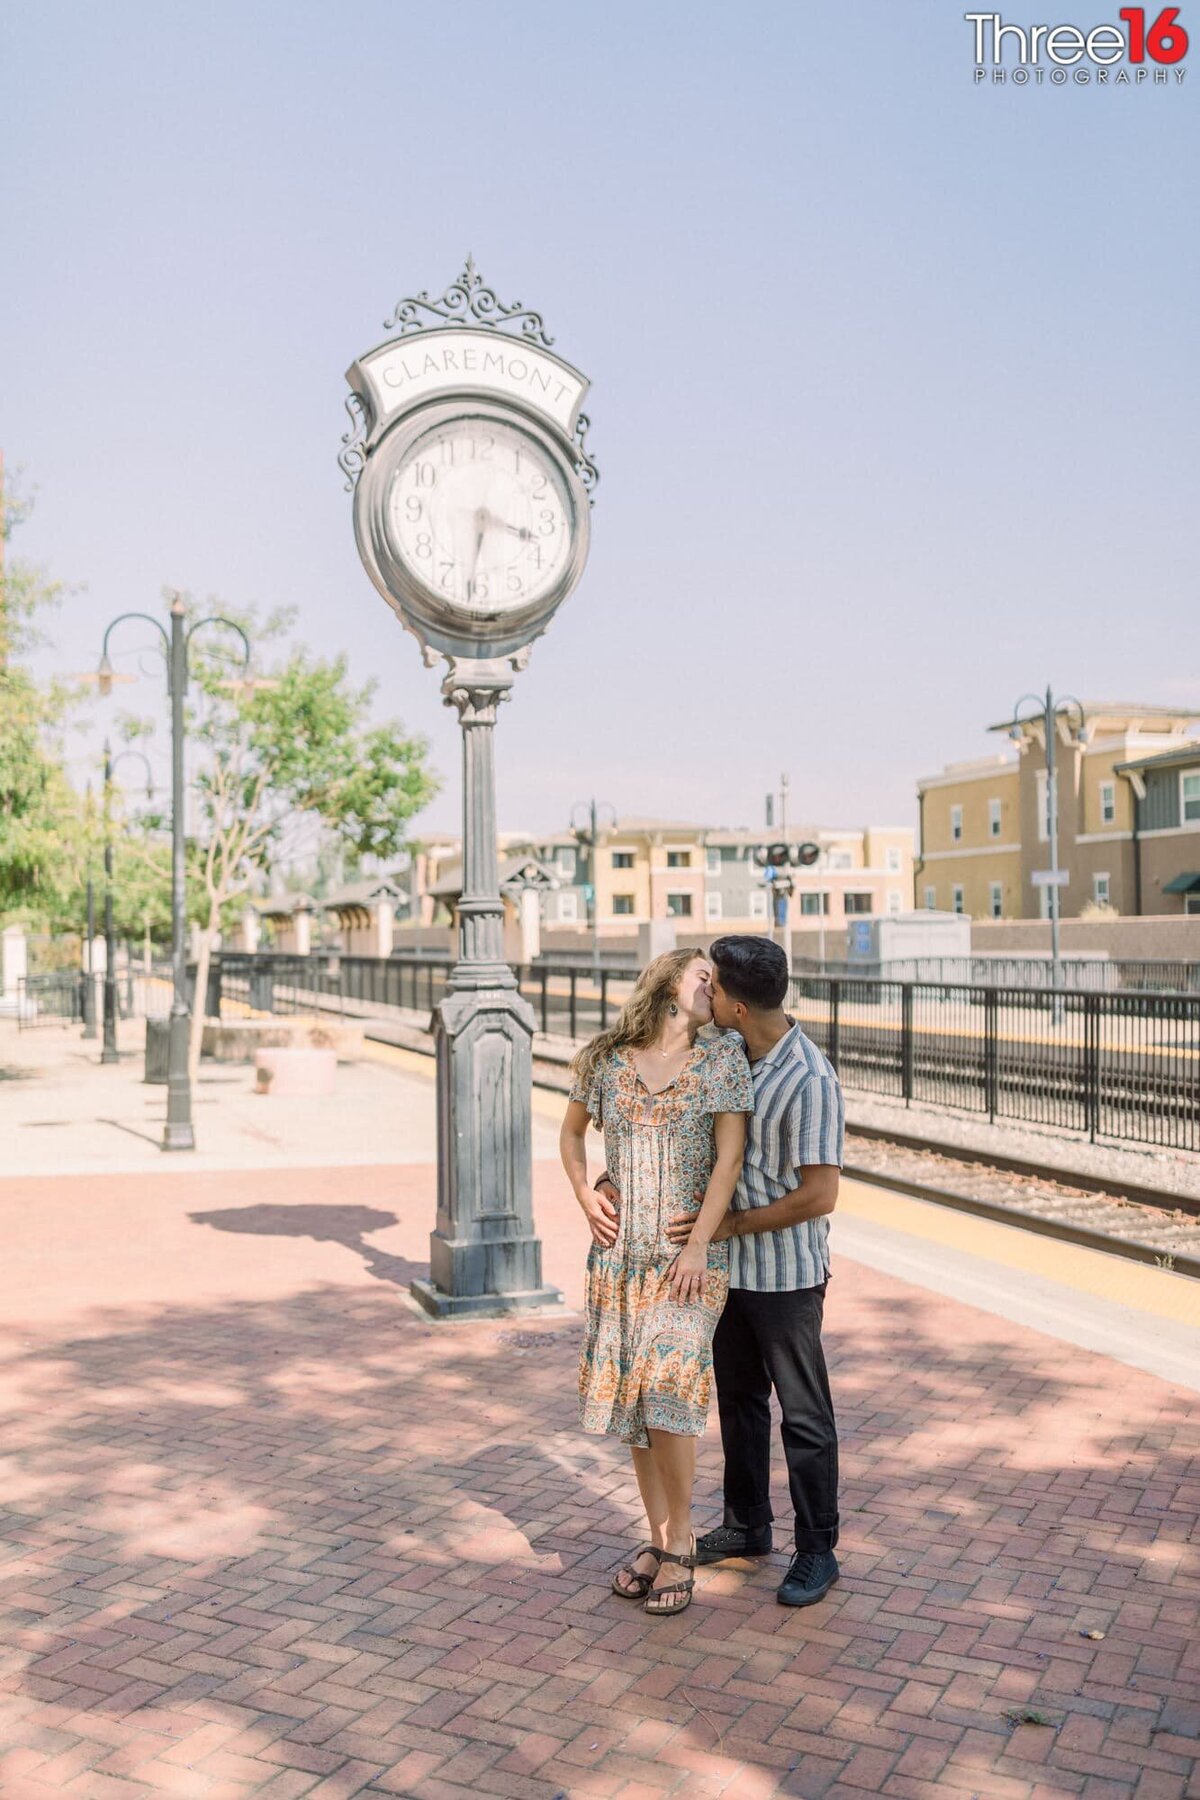 Bride to be looks back at her fiance and they share a kiss while standing under the Claremont Train Station clock tower